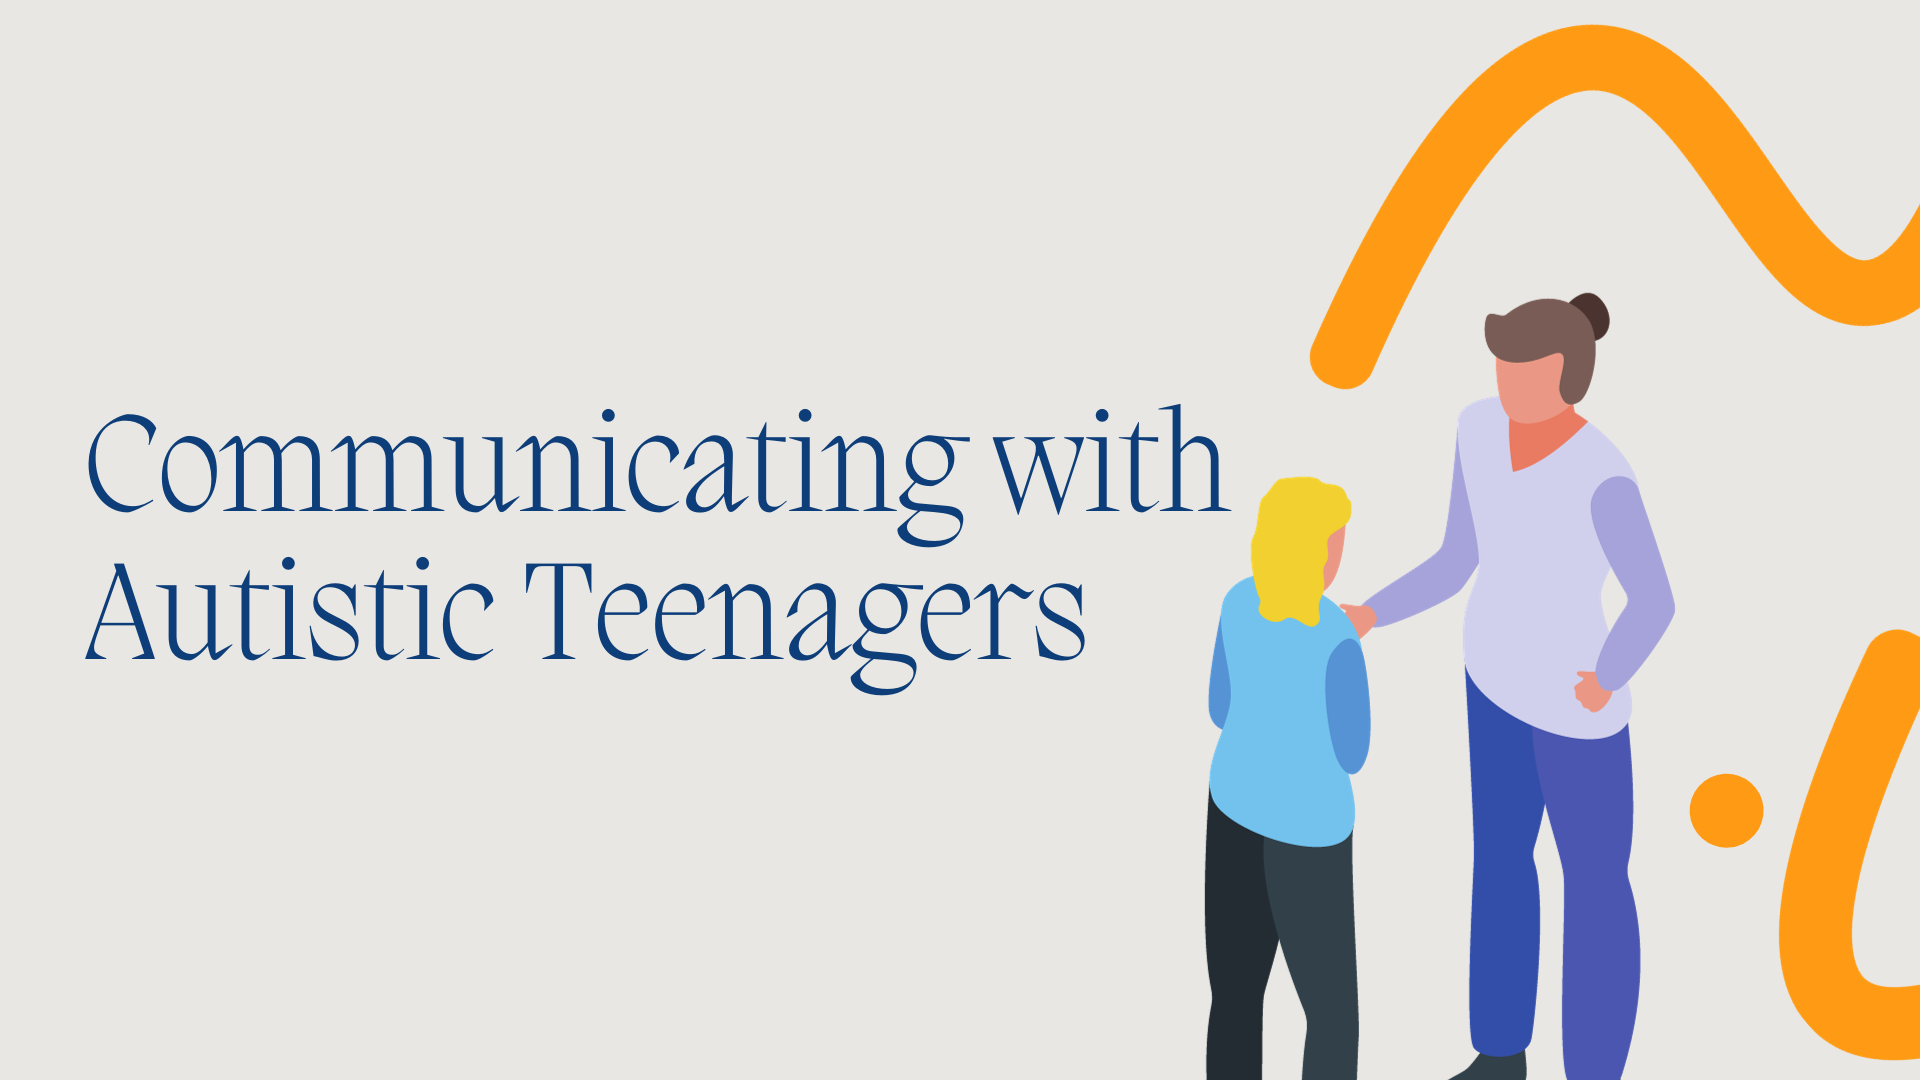 Communicating with Autistic Teenagers